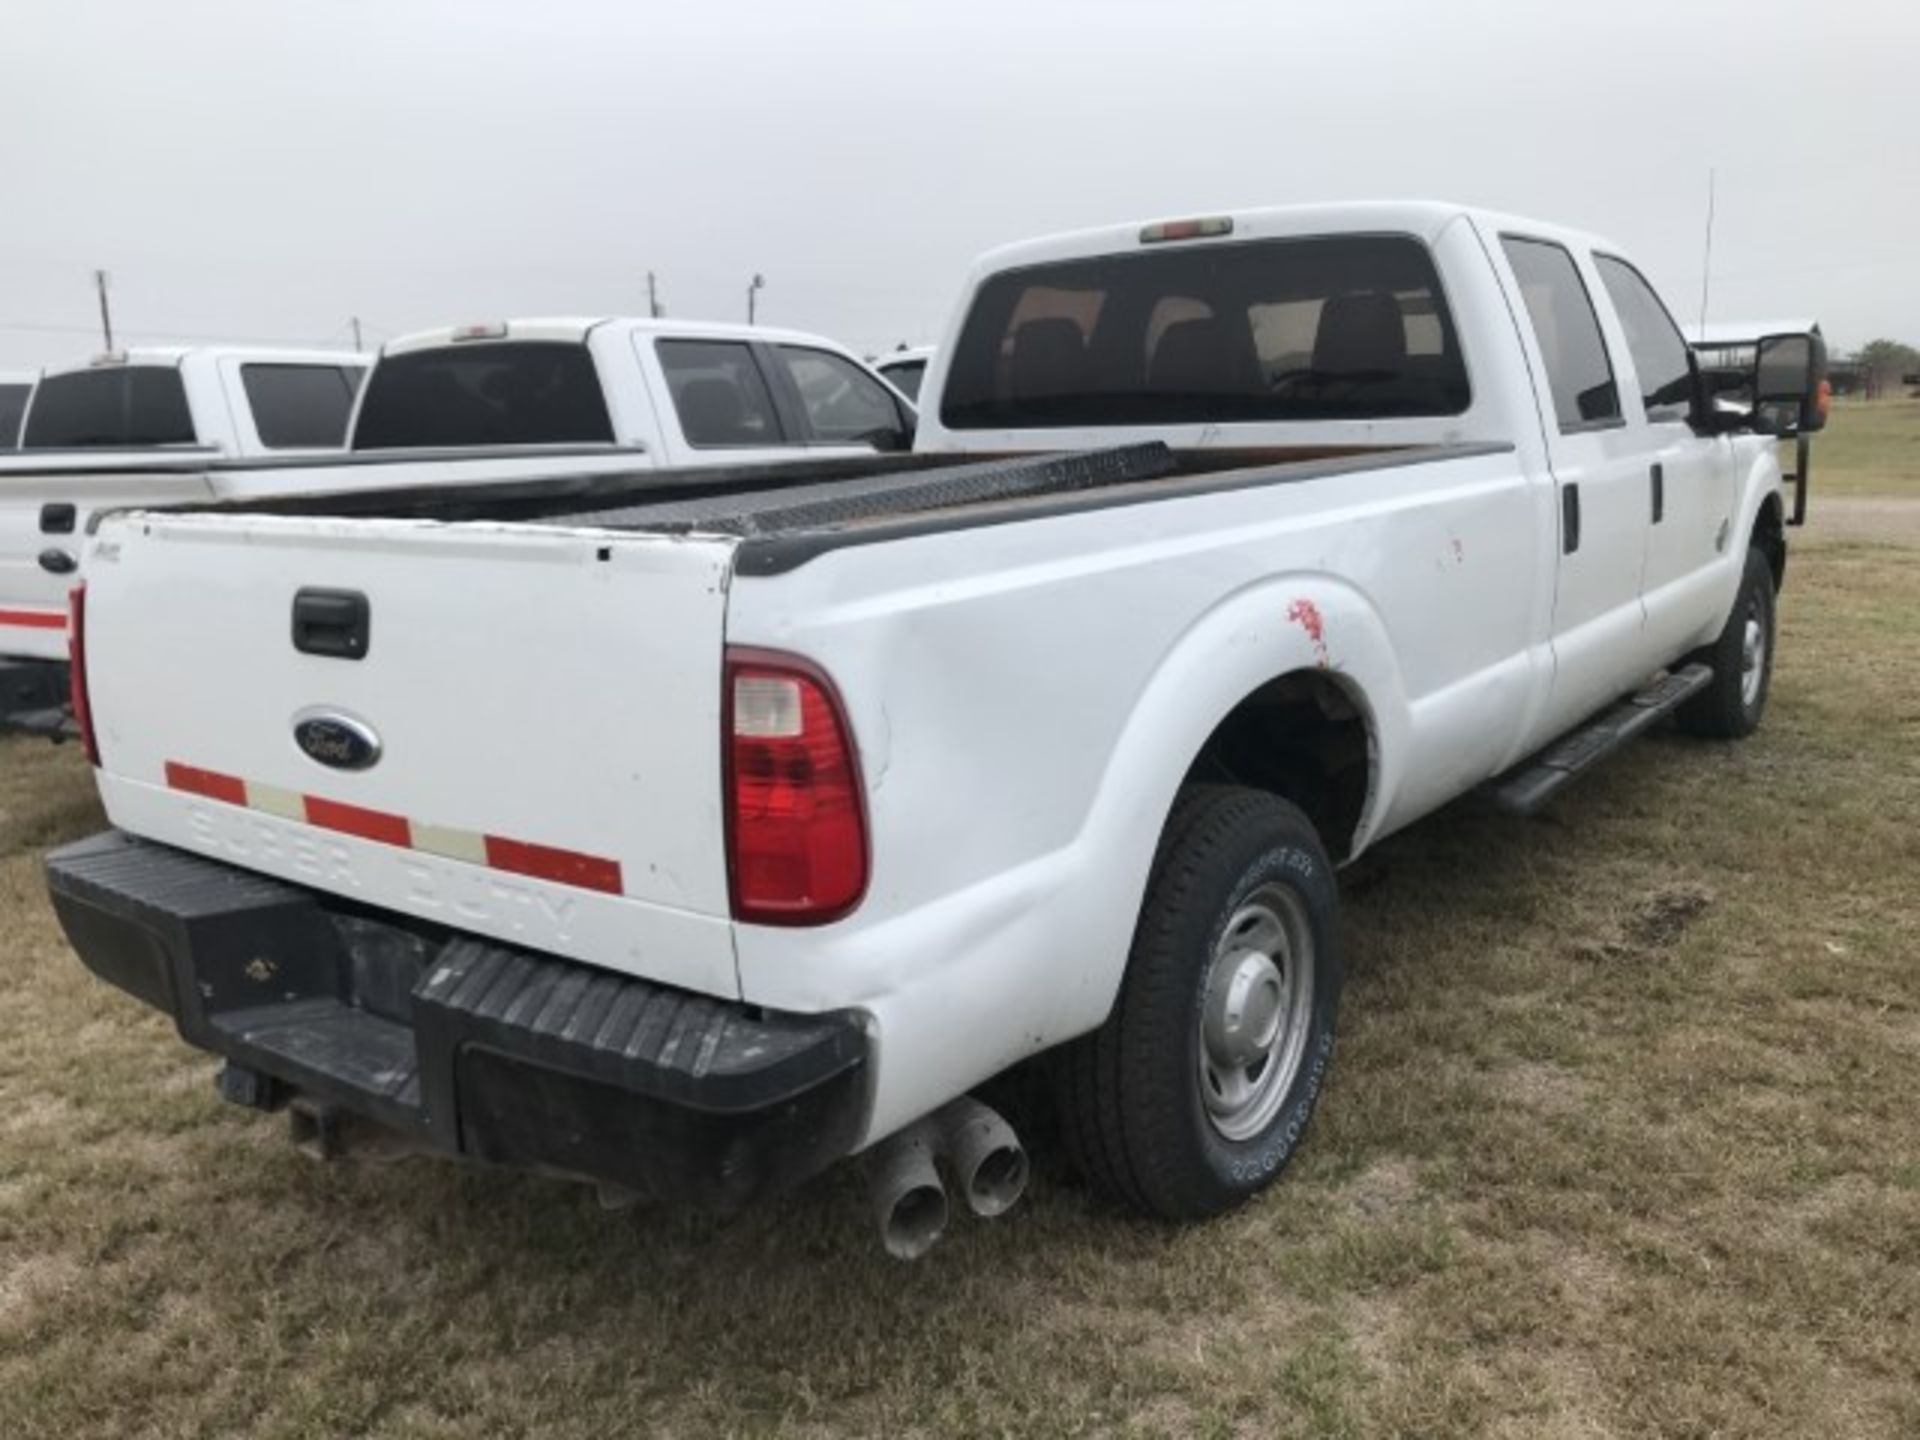 2011 Ford F-250 VIN: 1FT7W2BT9BEC06388 Odometer States: 209,070 Color: Whit - Image 3 of 6